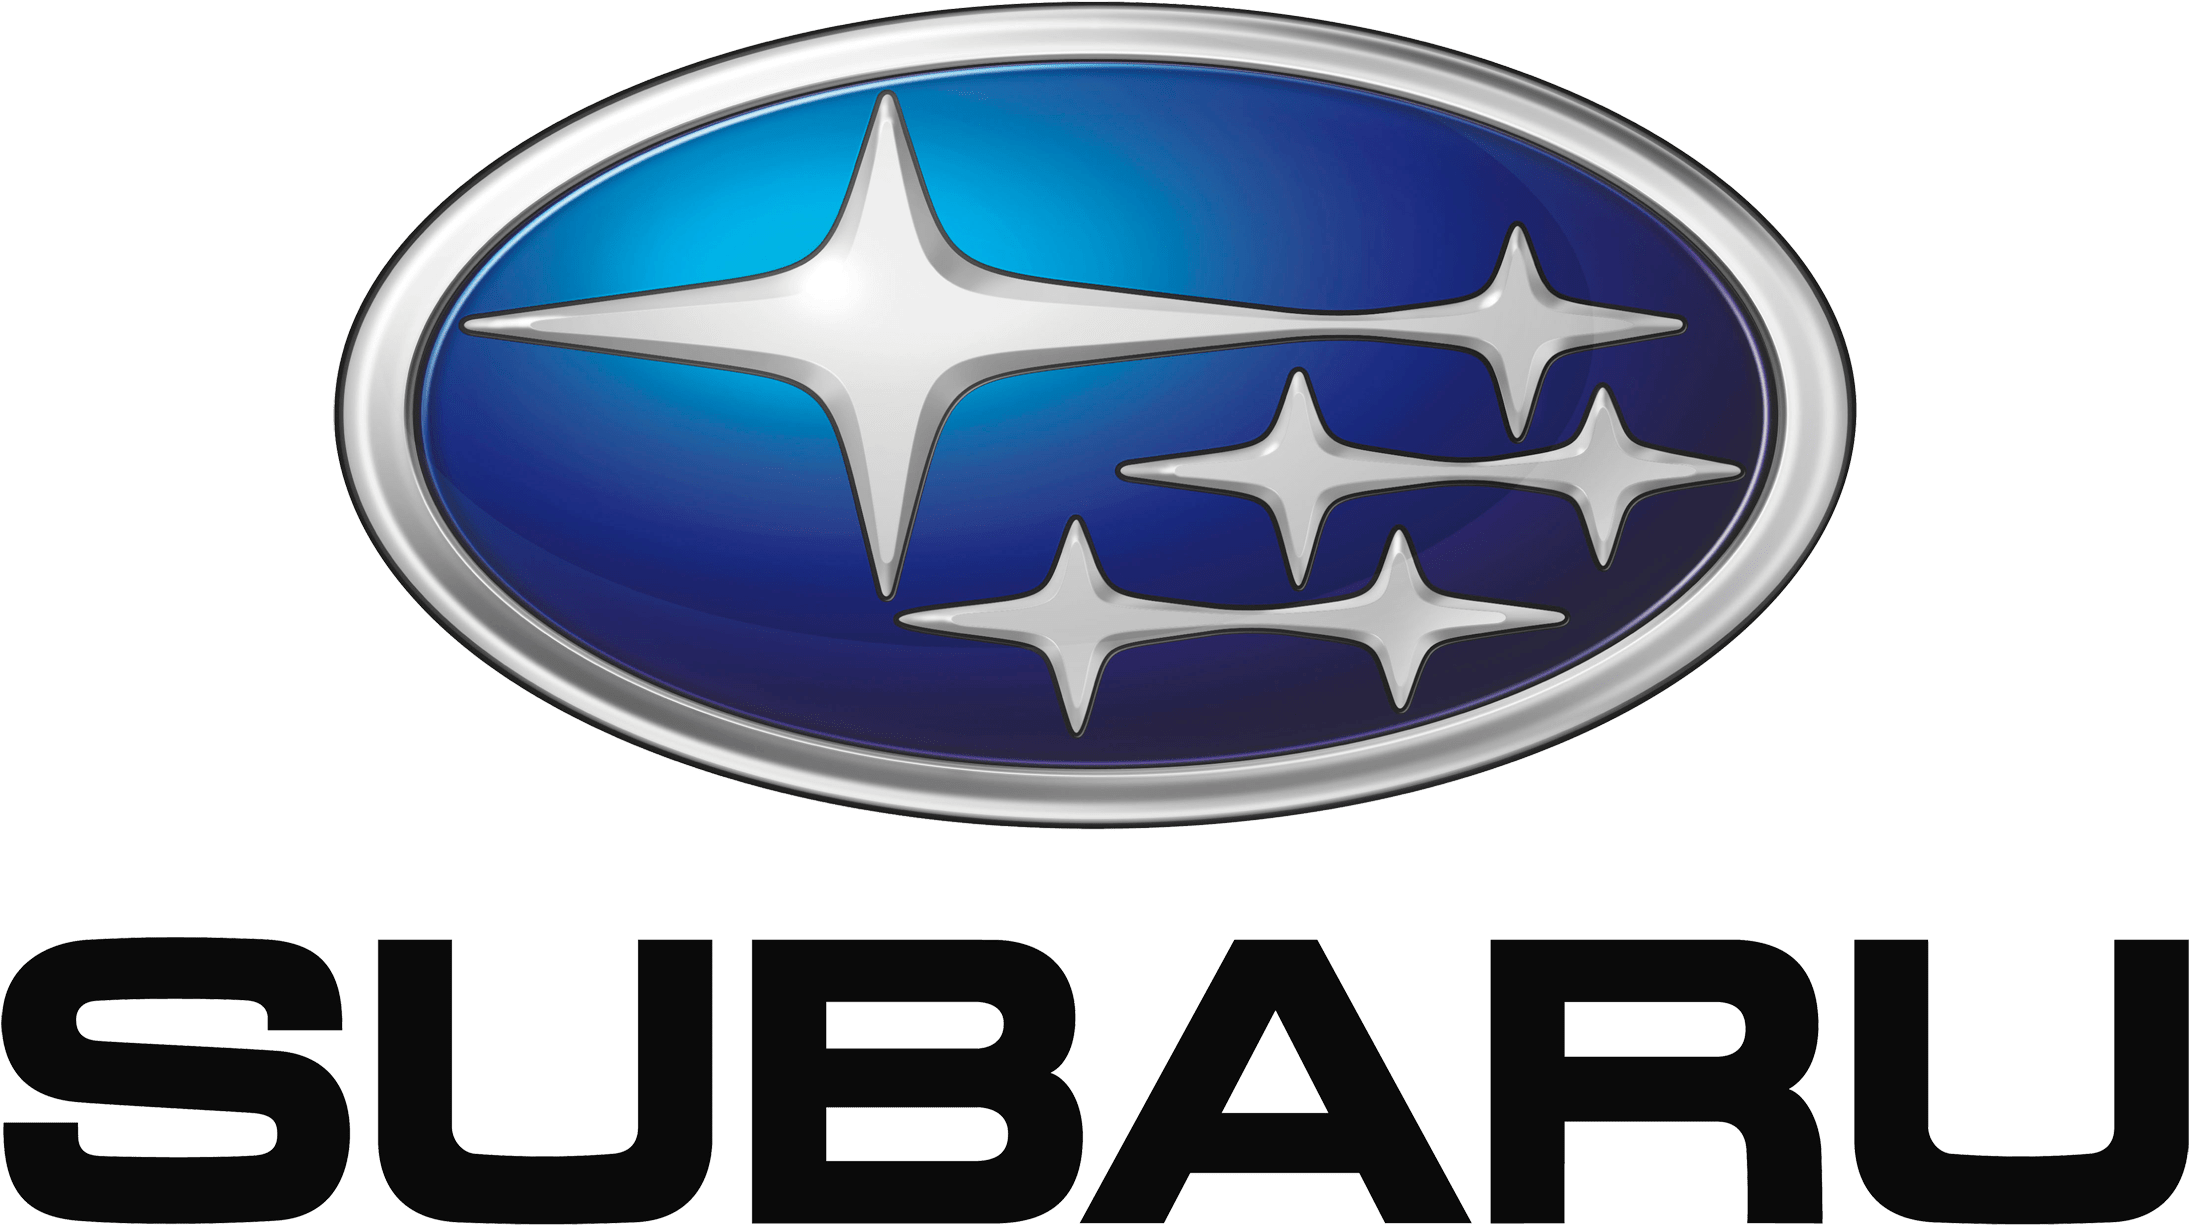 Now The Icon Of Toyota Has A Bulky Design - Subaru Logo (2560x1440), Png Download